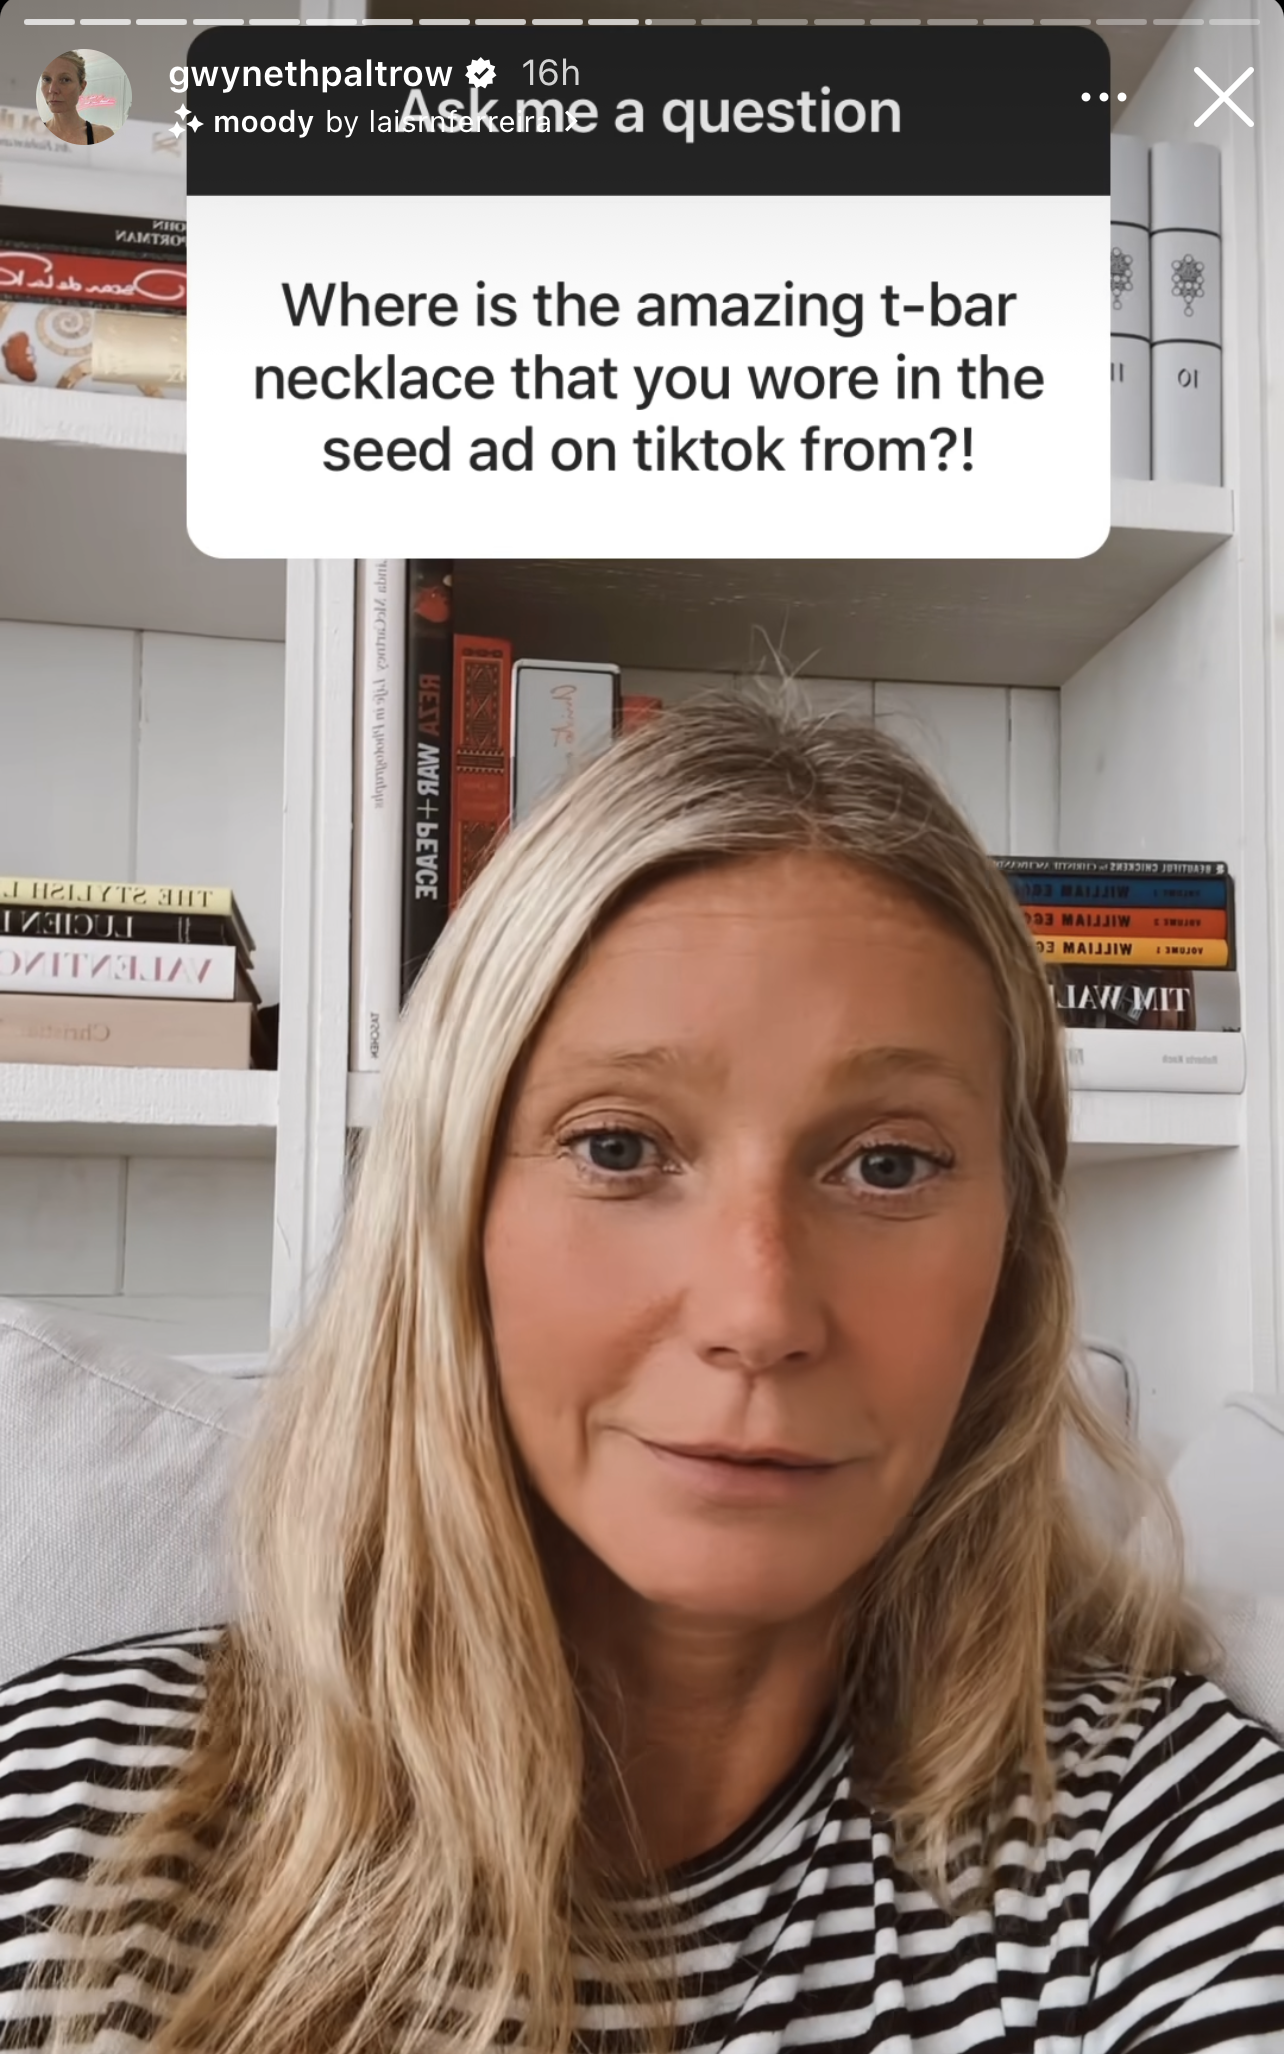 Screenshot of Gwyneth during the live with the question &quot;Where is the amazing t-bar necklace that you wore in the seed ad on tiktok from?&quot;